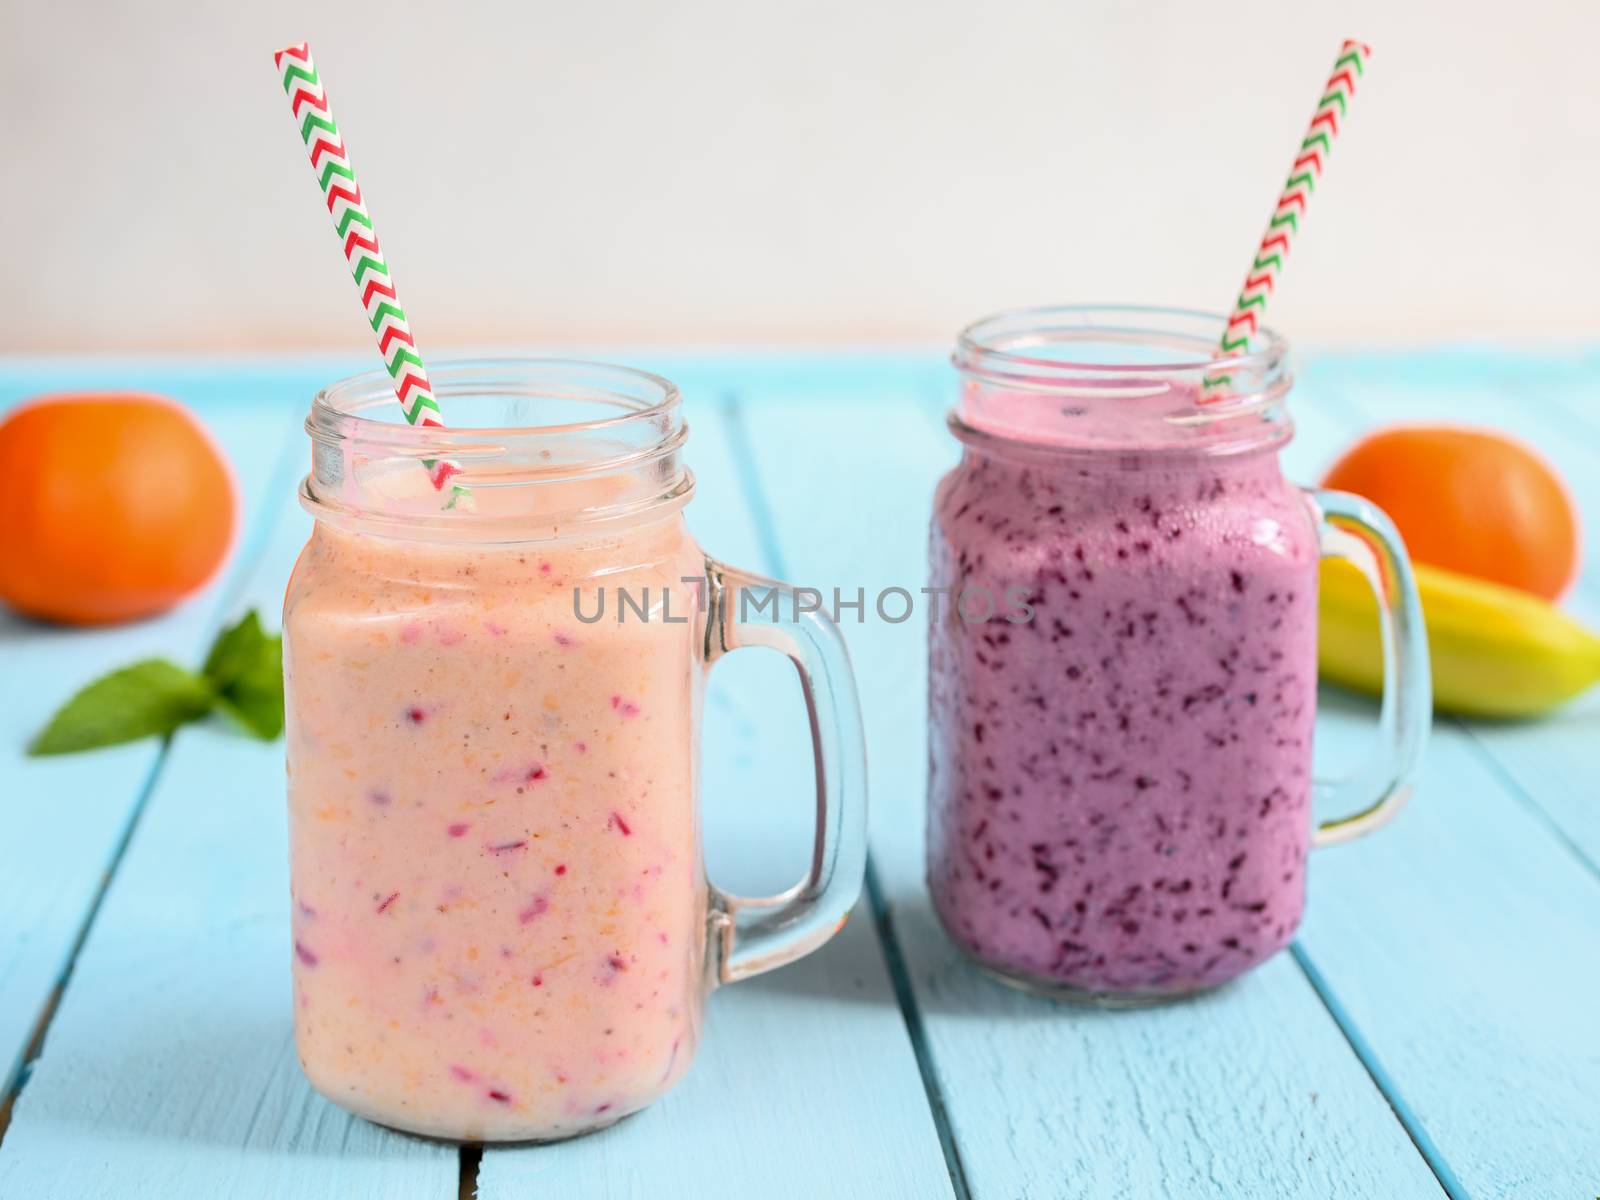 Blueberry smoothie with mint in mason jar with straw against a wood background by sashokddt